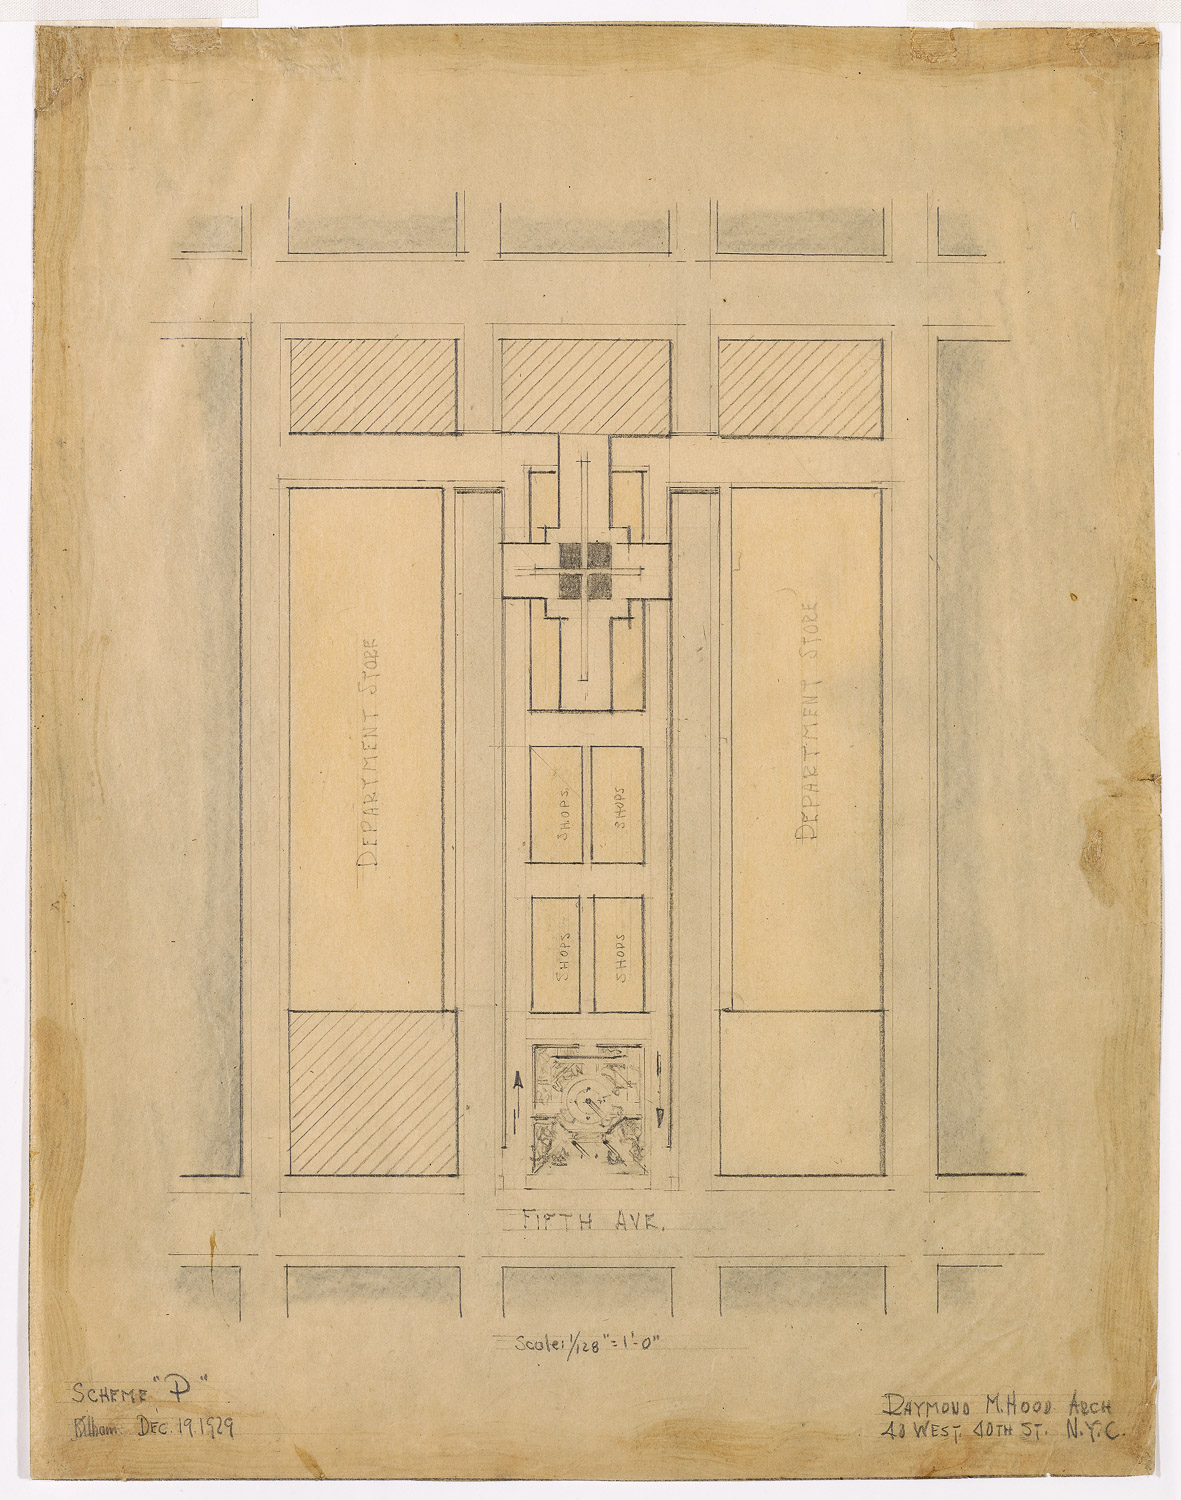 A site plan of the area bordered by Fifth Avenue. A the rear of the site is a single, large cruciform tower. Between Fifth Avenue and the tower are a large plaza and four small areas labeled “Shops.” This central area is flanked by two large blocks labelled ‘Department Store.”